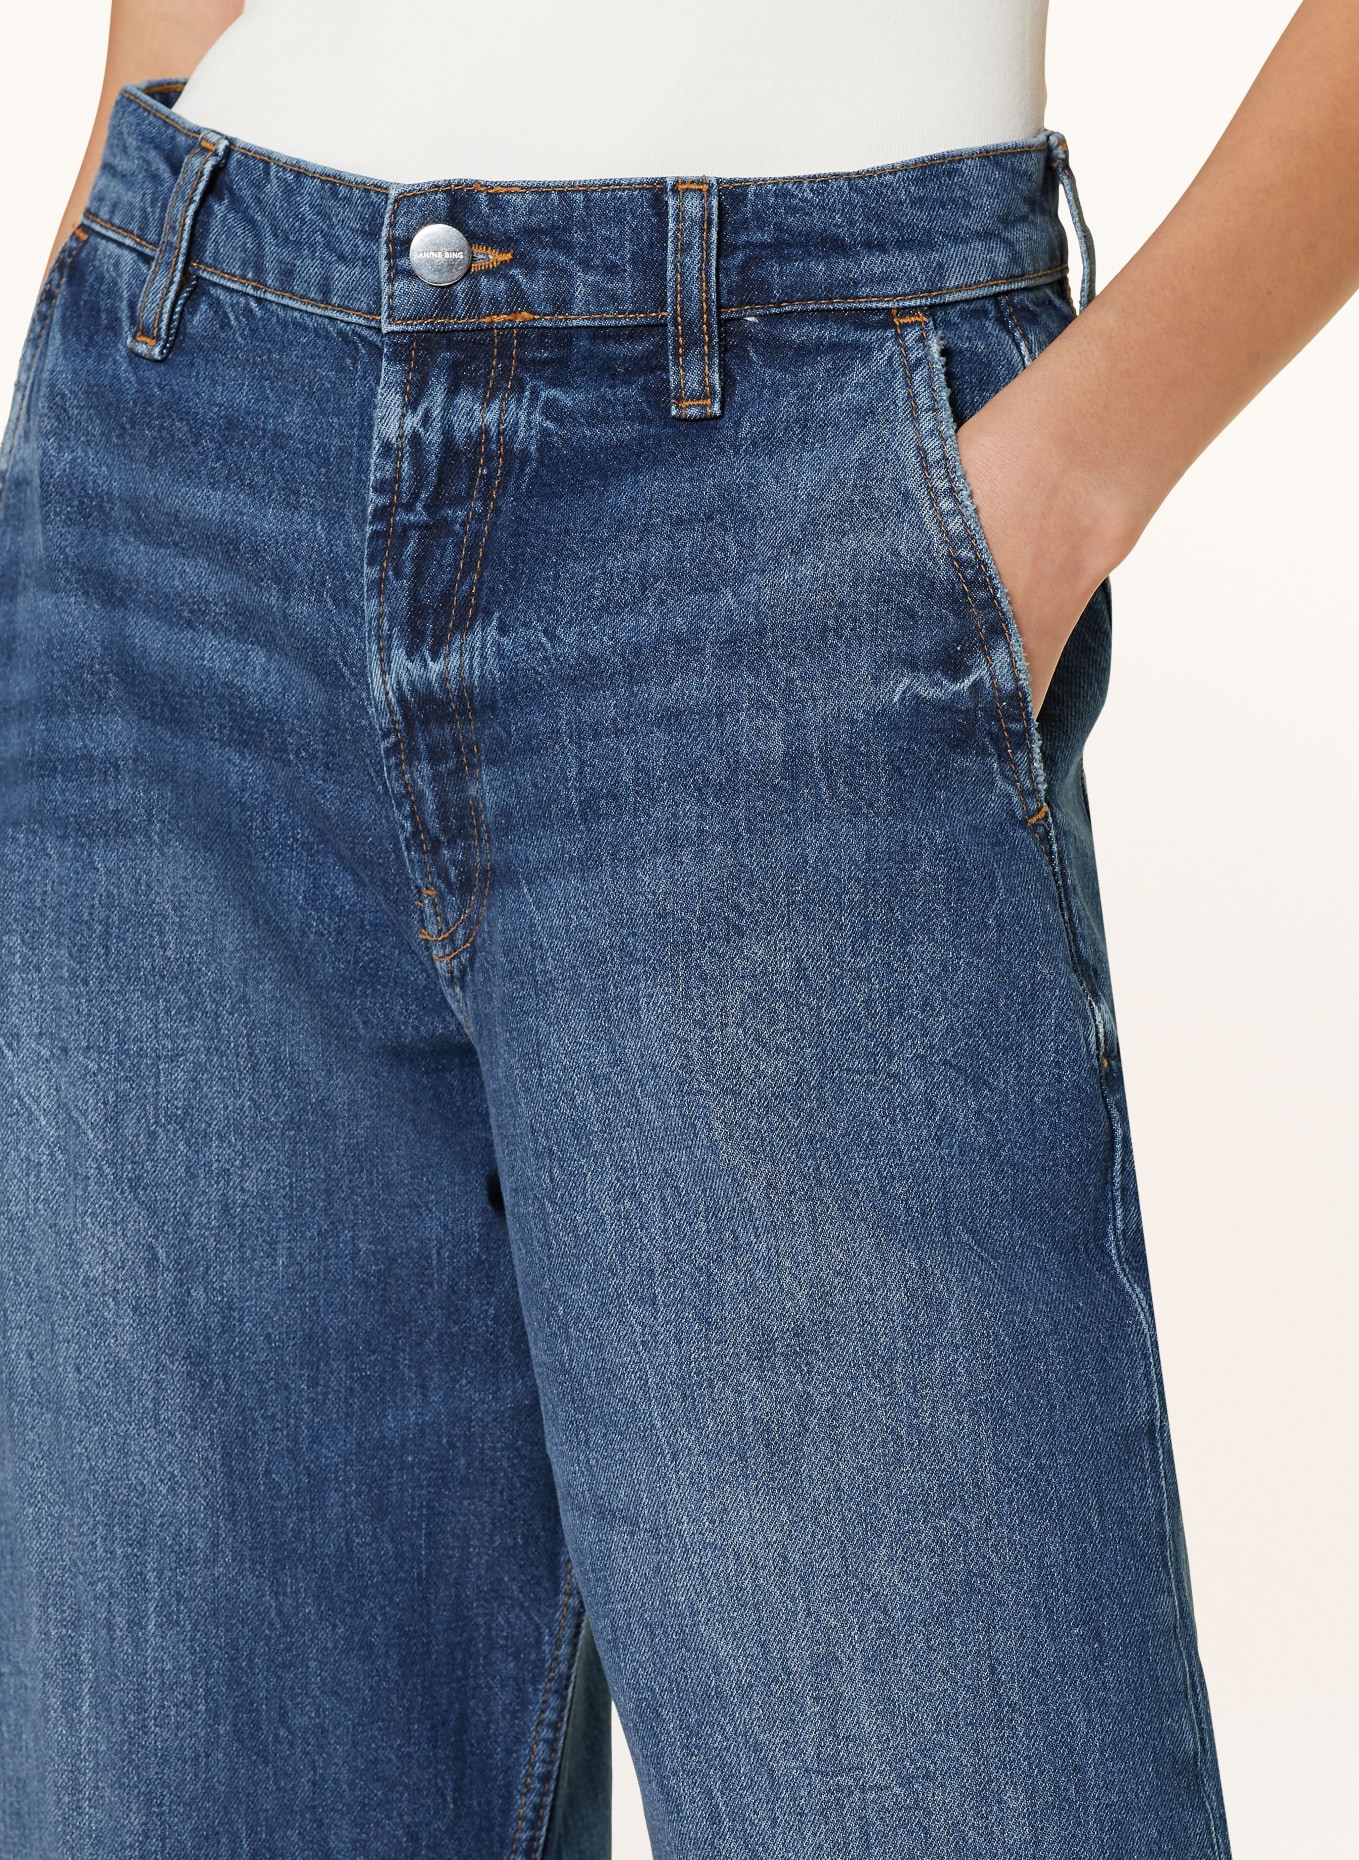 ANINE BING Straight Jeans BRILEY, Farbe: WASHED BLUE WASHED BLUE (Bild 5)